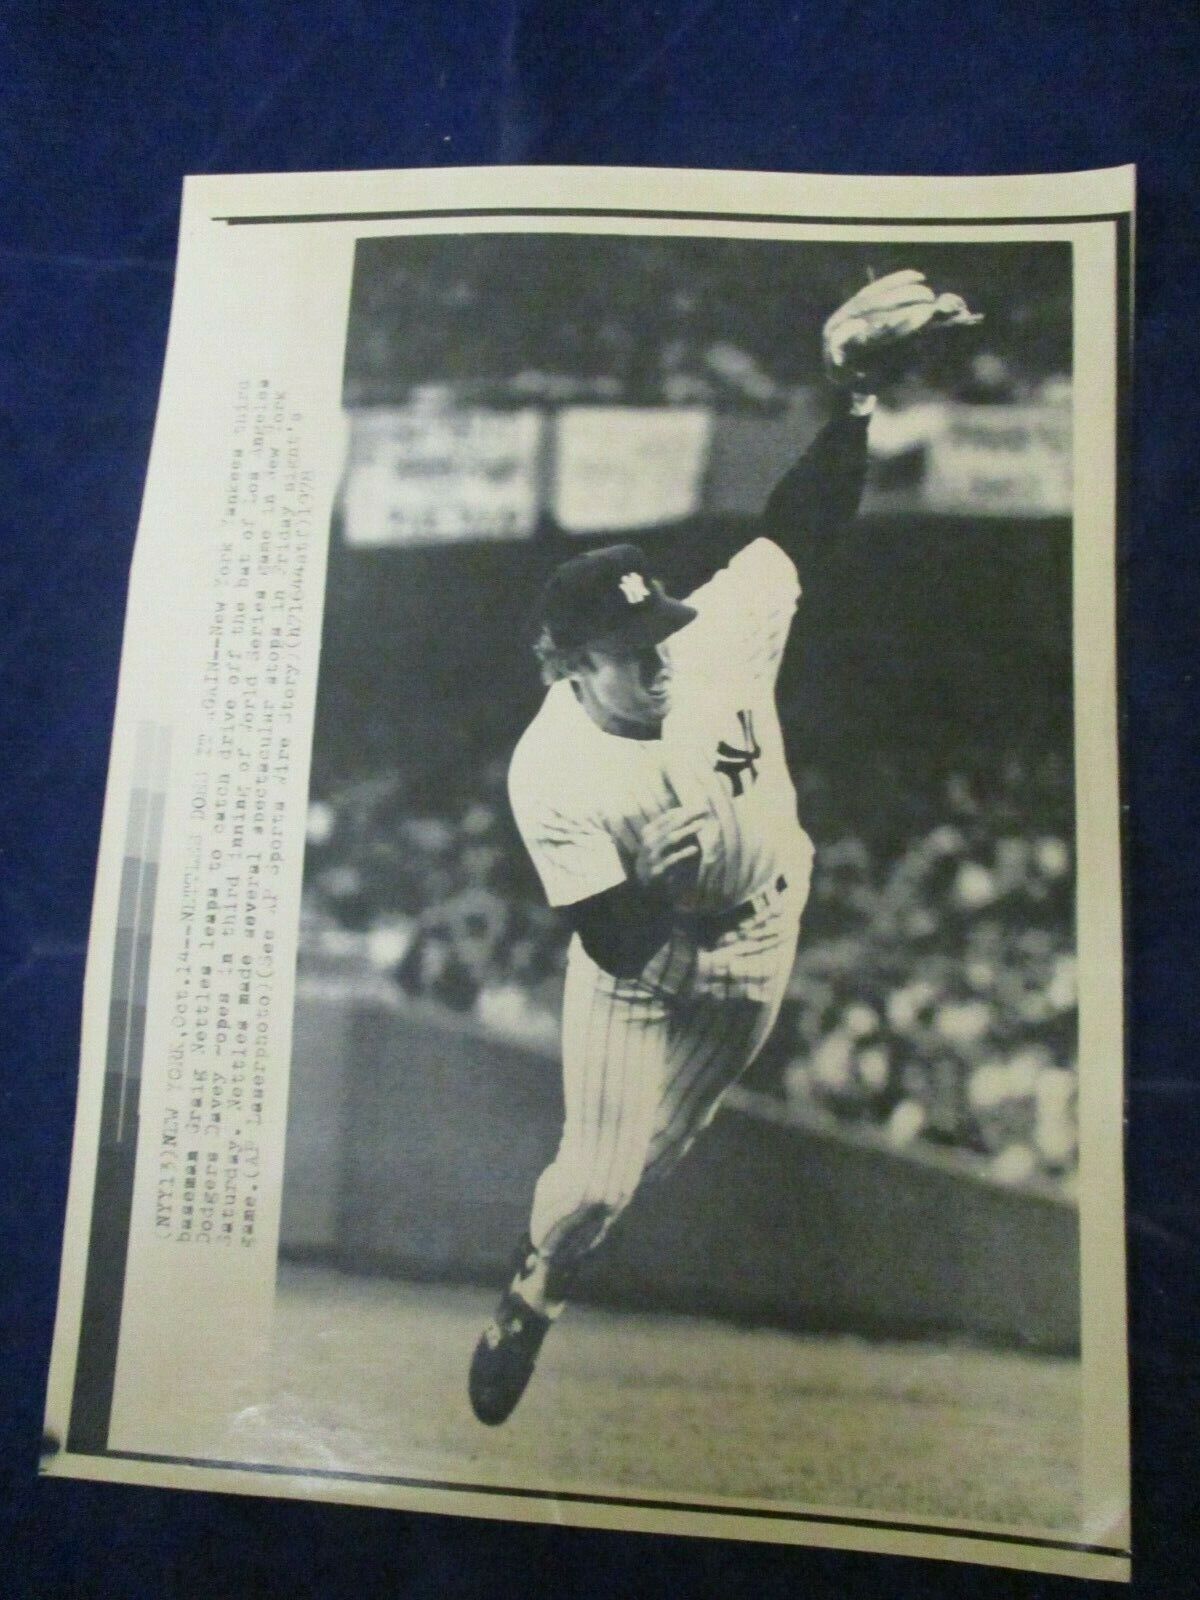 1978 MLB Graig Nettles 3B NYY diving catch World Series Vintage Wire Press Photo